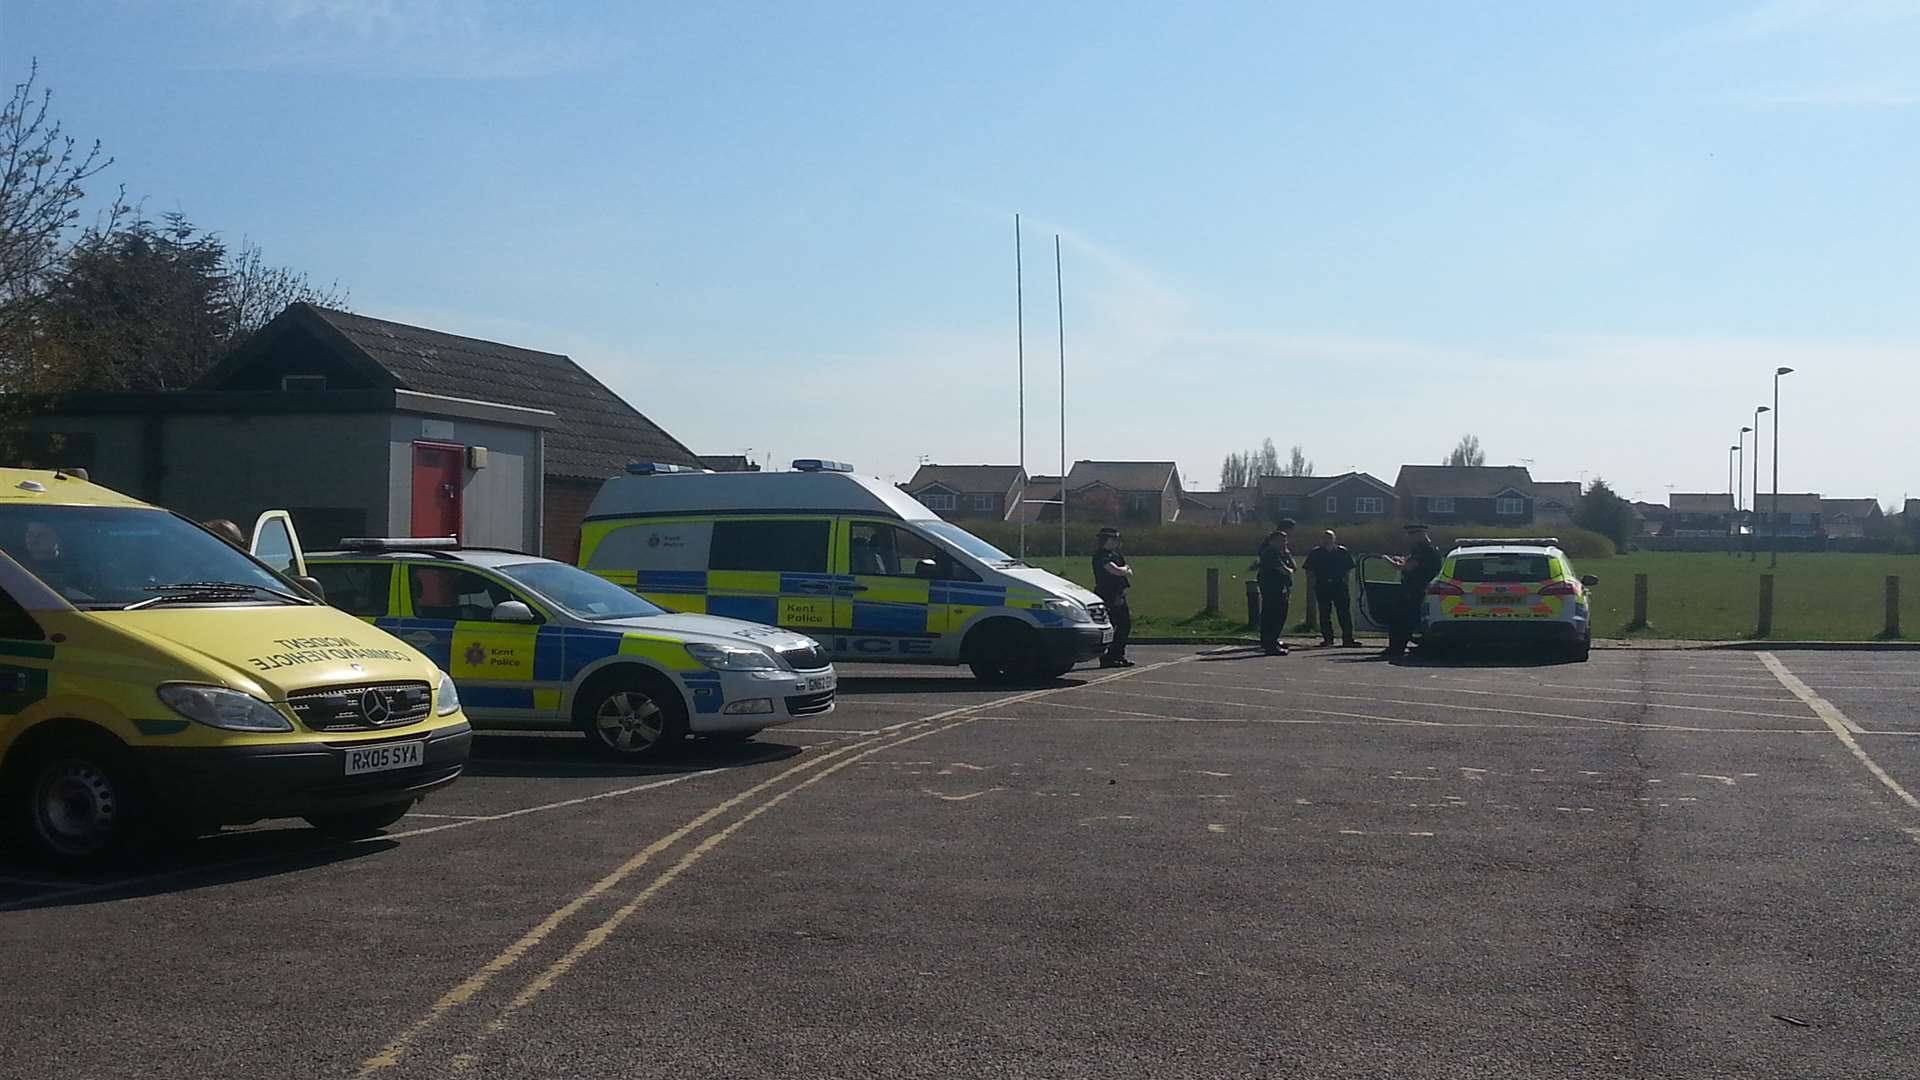 Police were called to Longacre at 1.55pm and were seen in Whitstable Rugby Club's car park